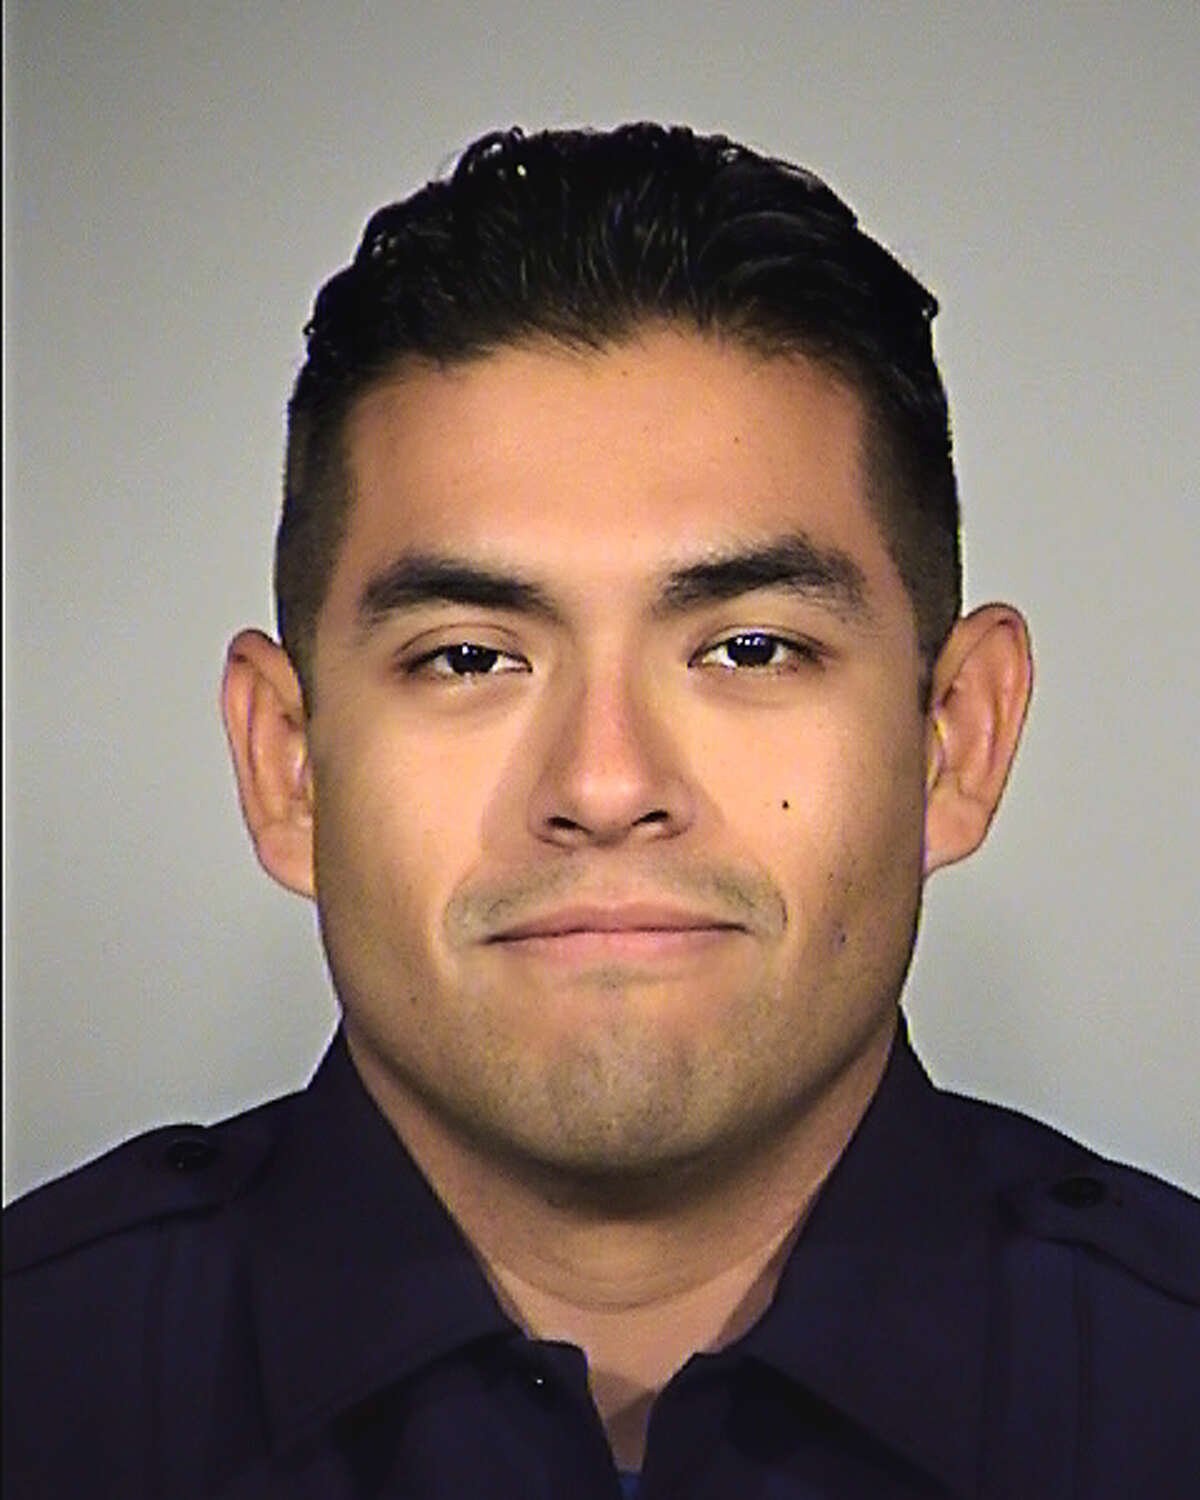 Miguel Moreno, June 29, 2017 Officer Moreno was shot while investigating a suspicious person as he and his partner approached two men near a car that appeared to have been broken into. He was pronounced dead at 11:11 a.m., June 30, 2017. He was 32.